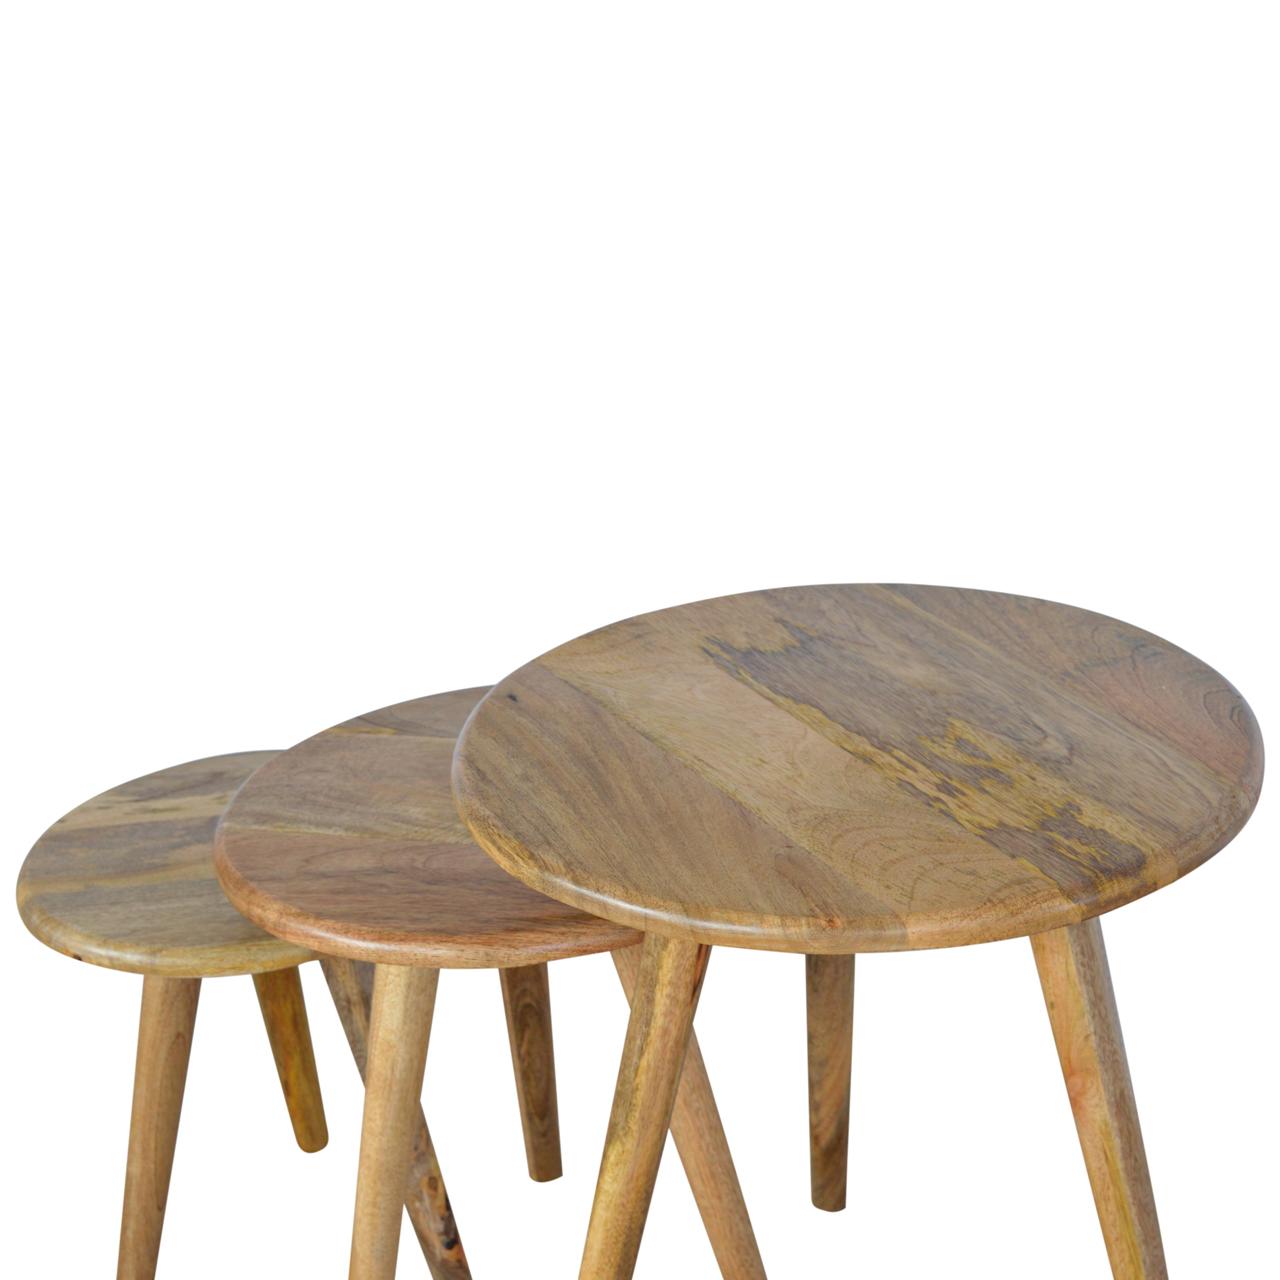 Nordic Style Stool Set Of 3